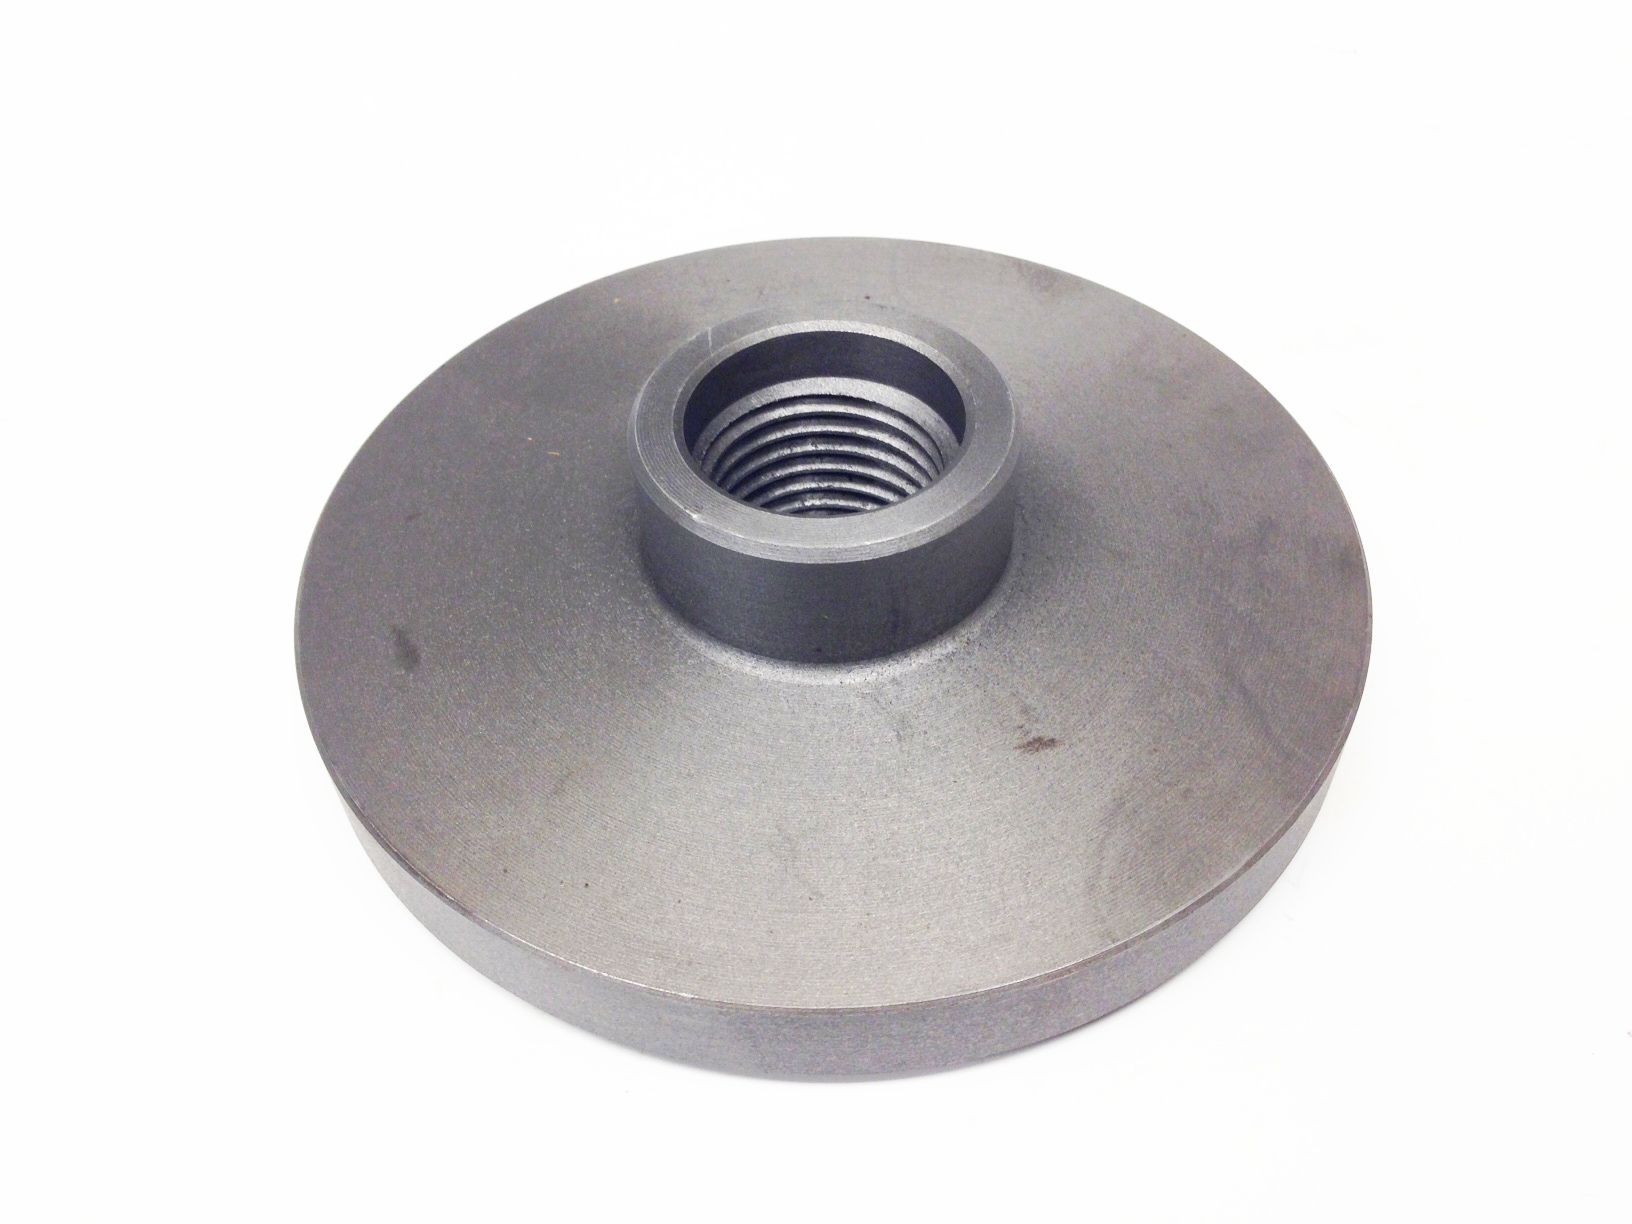 THREADED 1"-8 BACKPLATE/ADAPTER WITH NO HOLES FOR 4" LATHE CHUCKS (3900-3304)